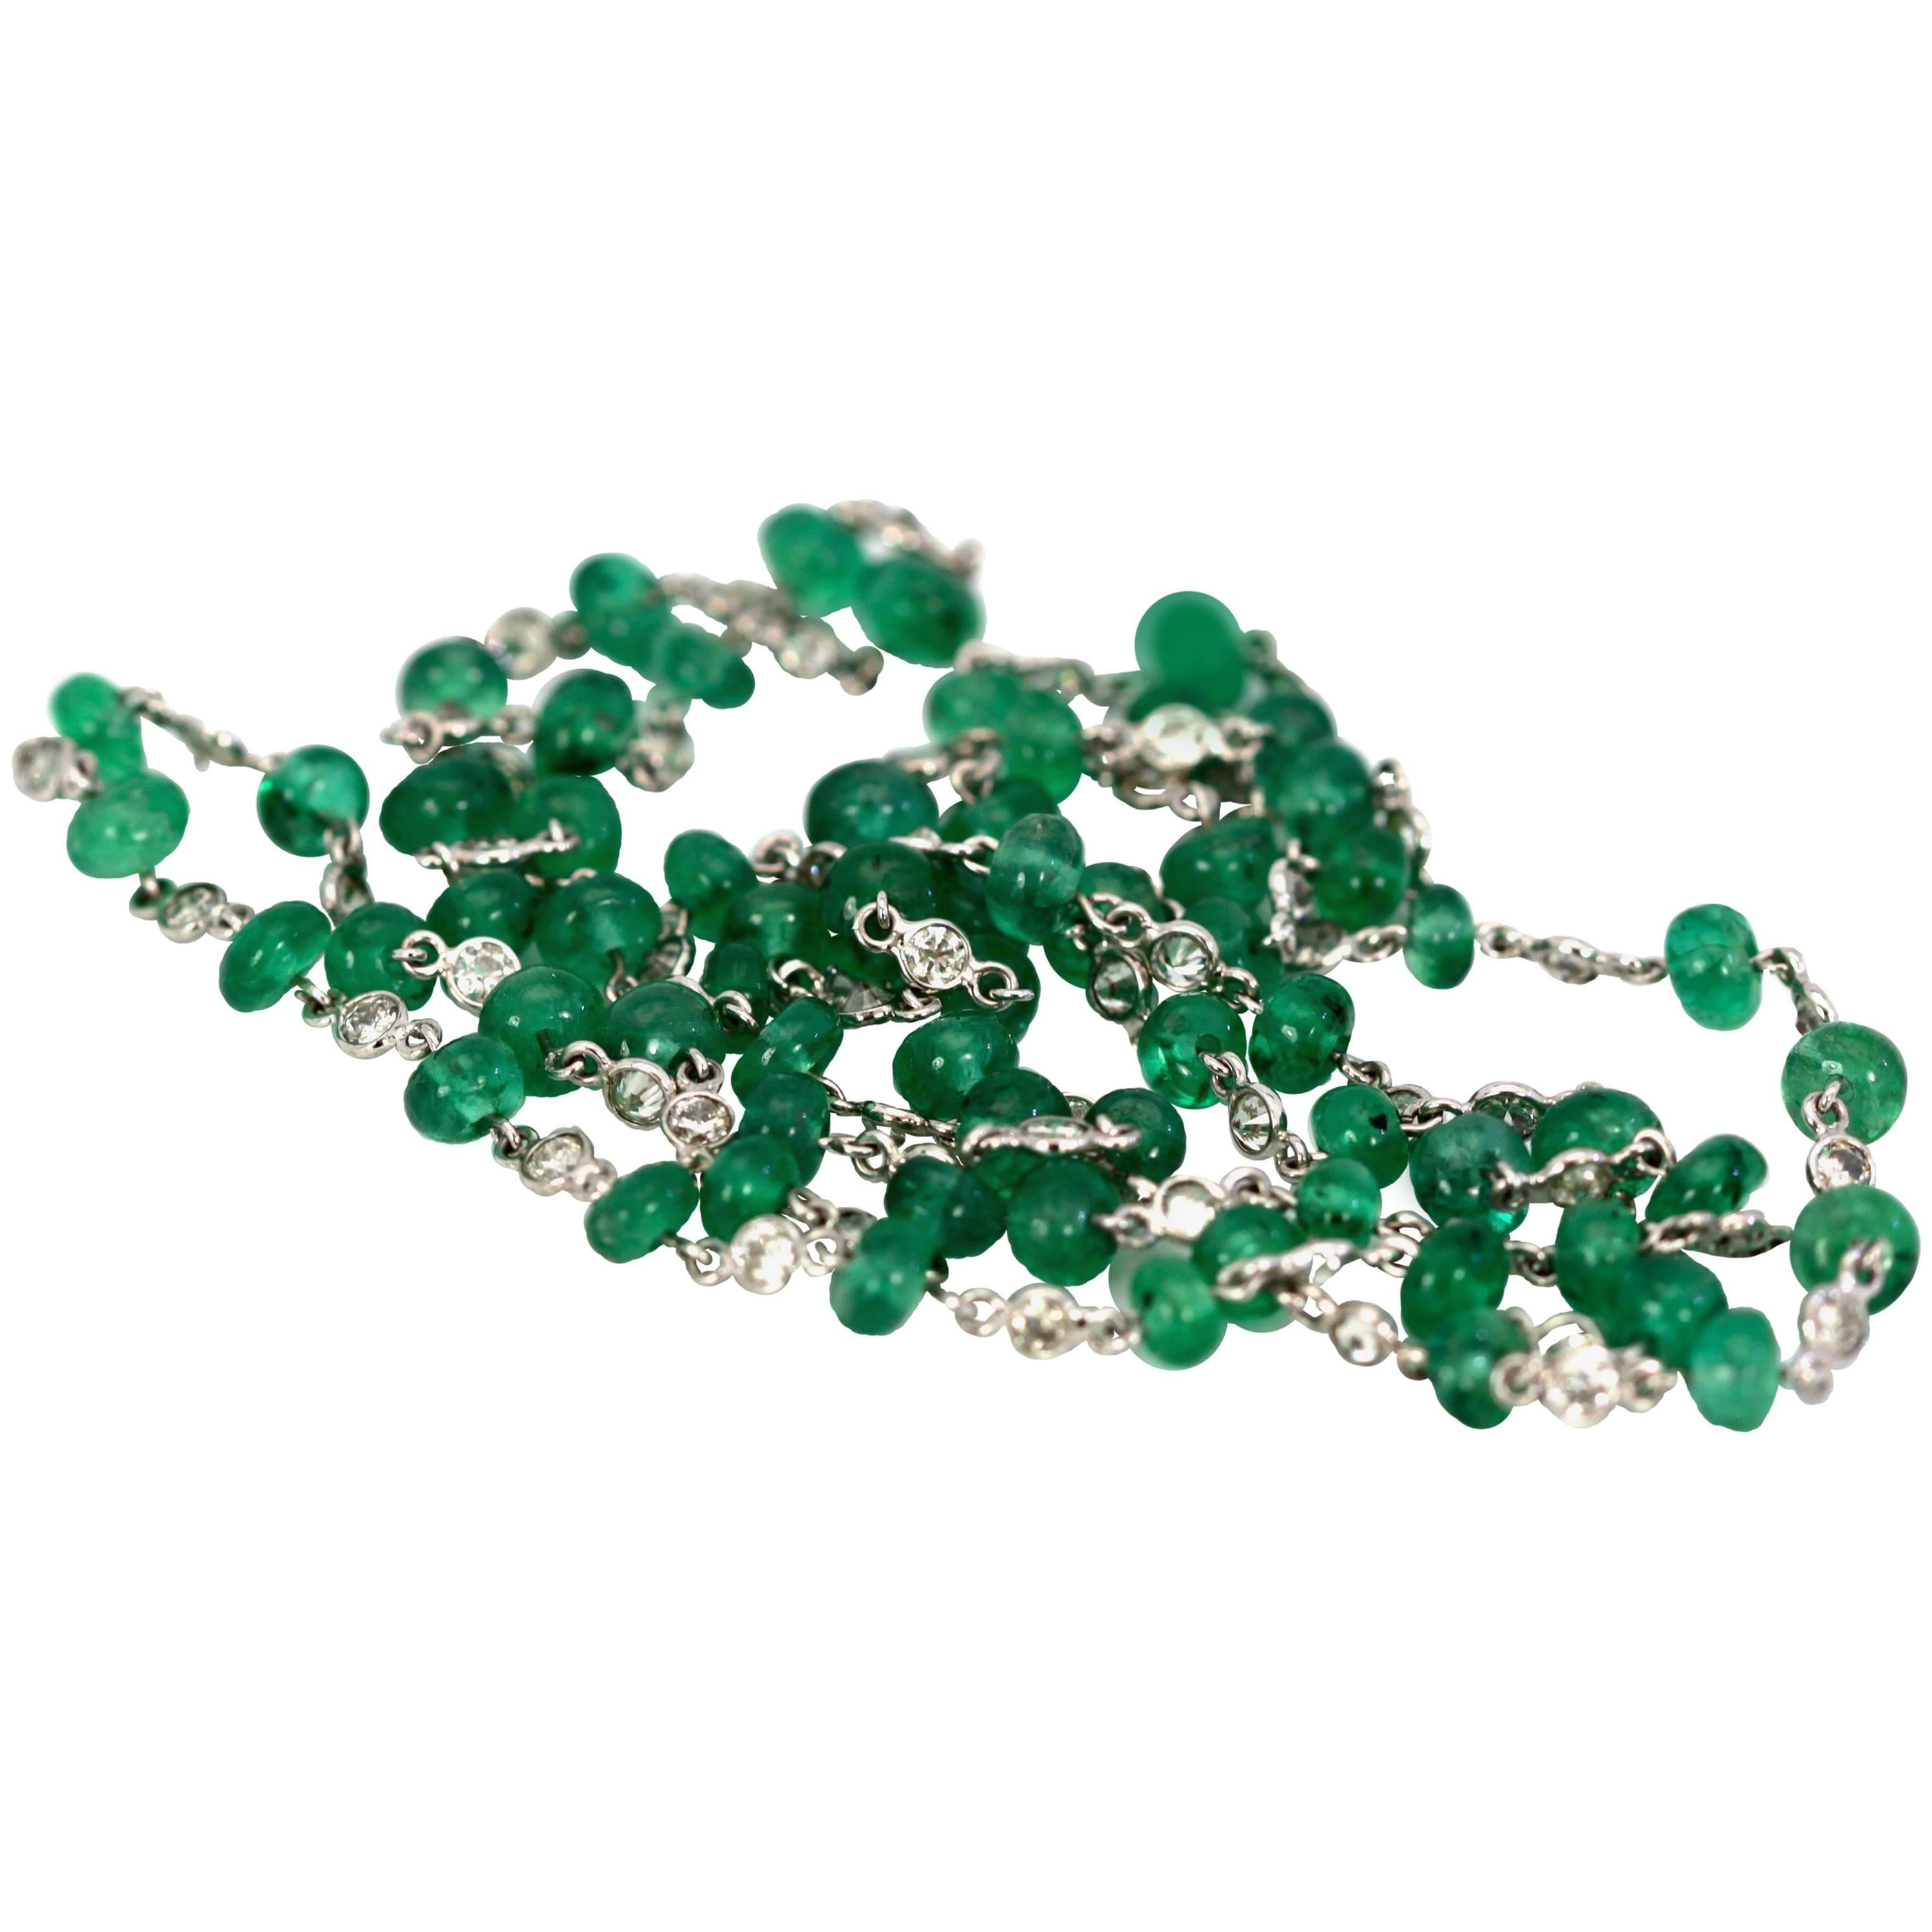 Gorgeous Emerald and Diamond Bead Necklace consists of sixty-five (65) Diamonds with a clarity of SI2 and color H-I. The Emeralds have a slightly yellowish green grade and there are sixty-five (65) emerald beads. This necklace alternates between one